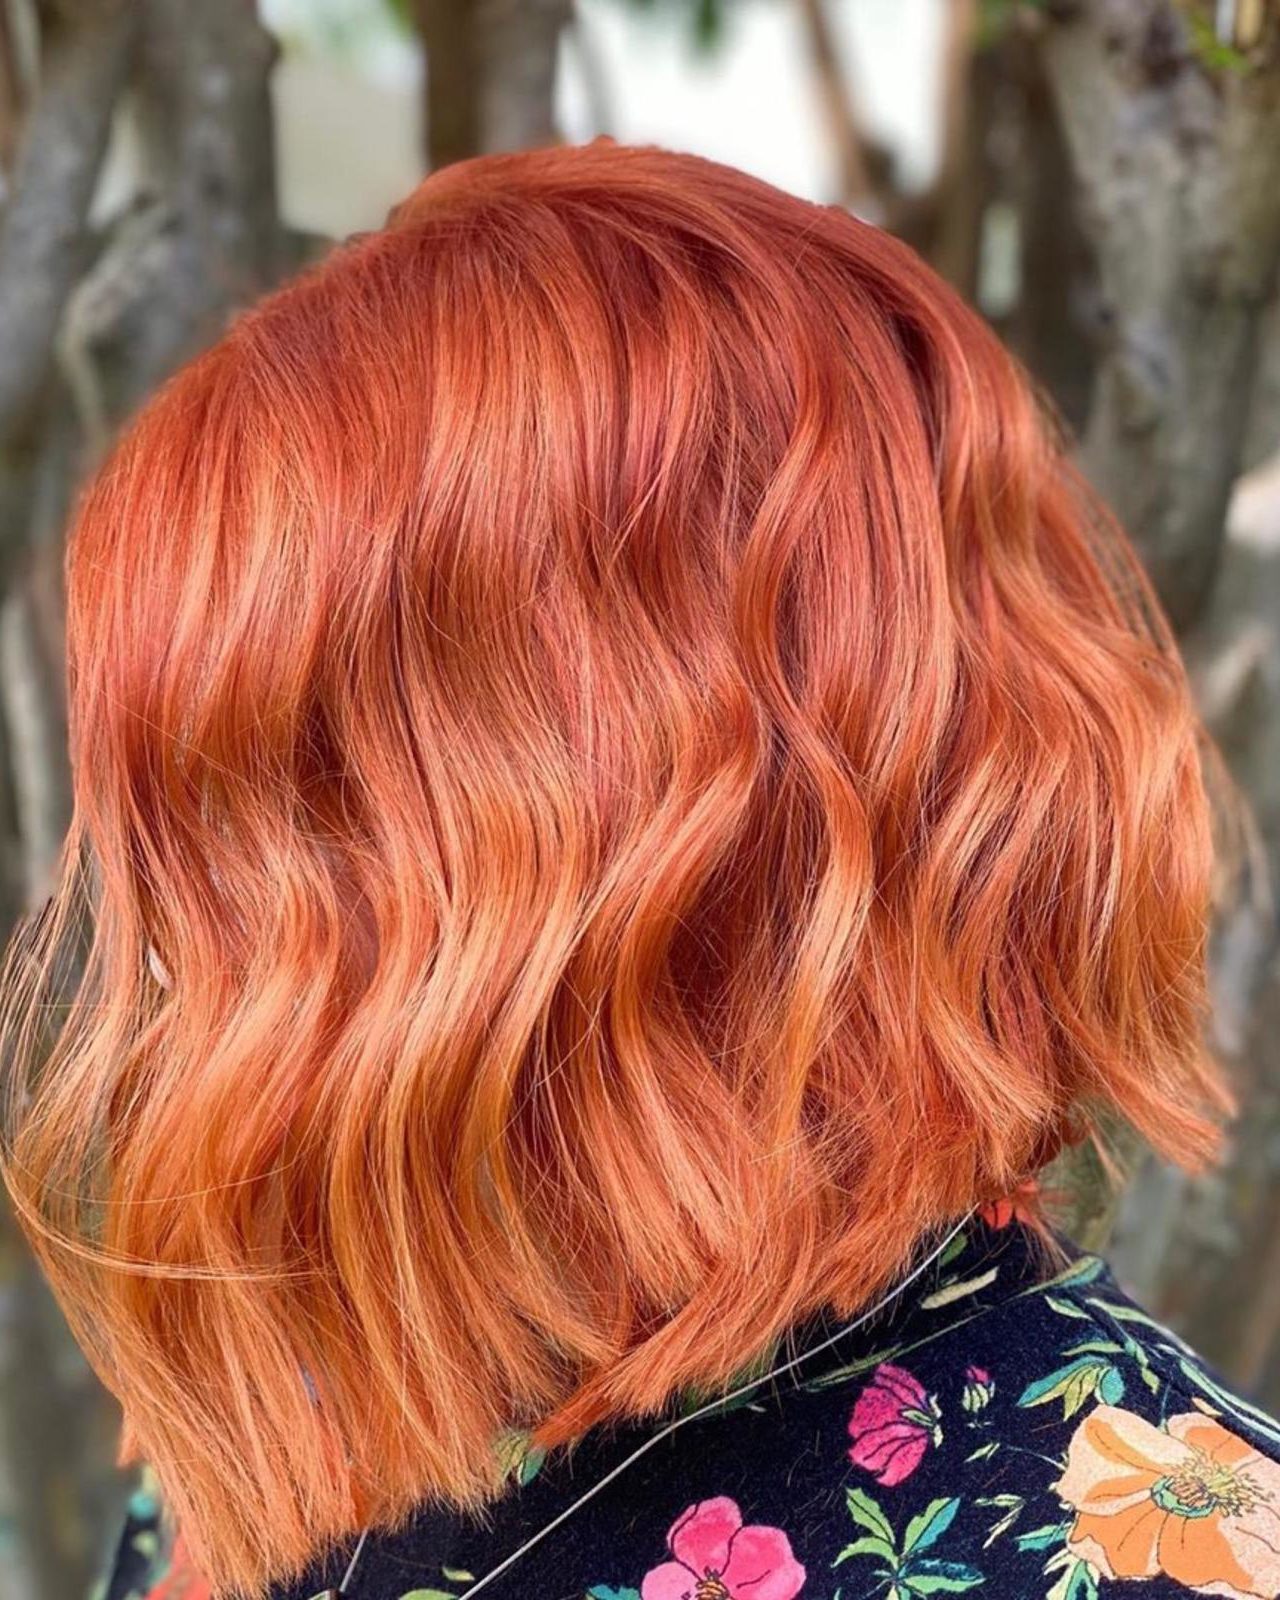 Best Shades of Red Hair from Hair Salon Tampa